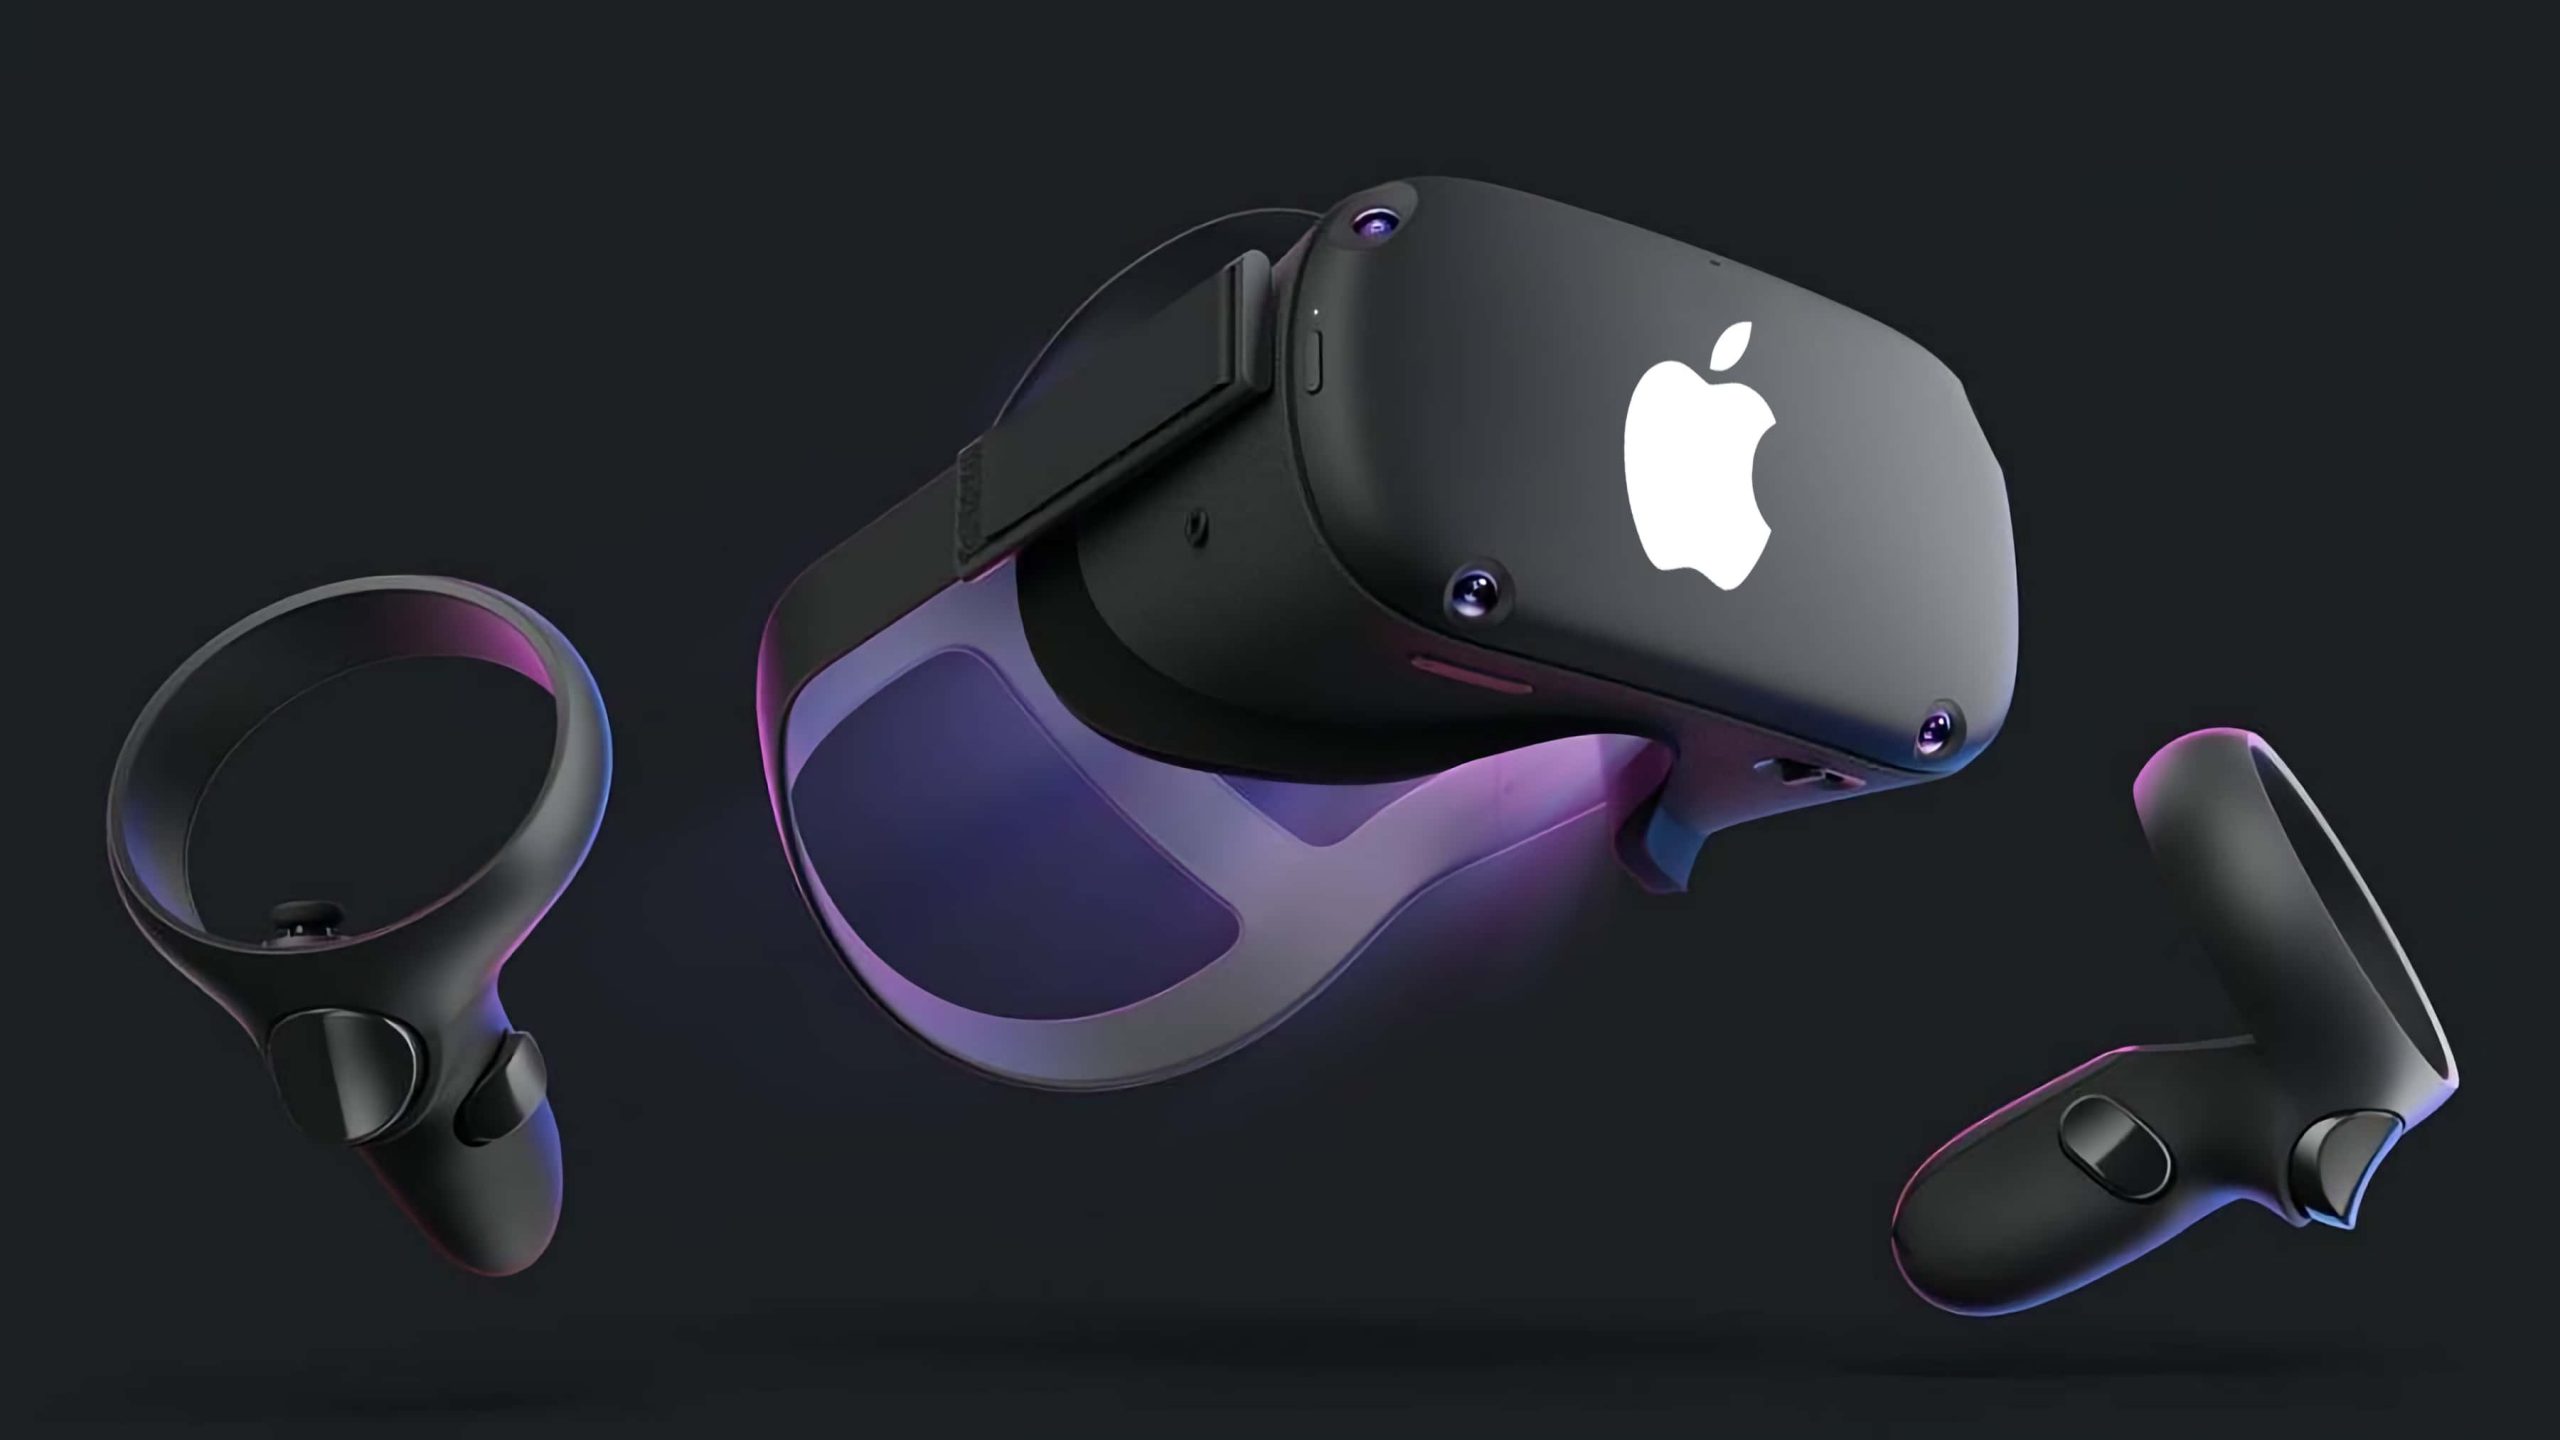 Apple’s VR headset will enhance gaming and calling